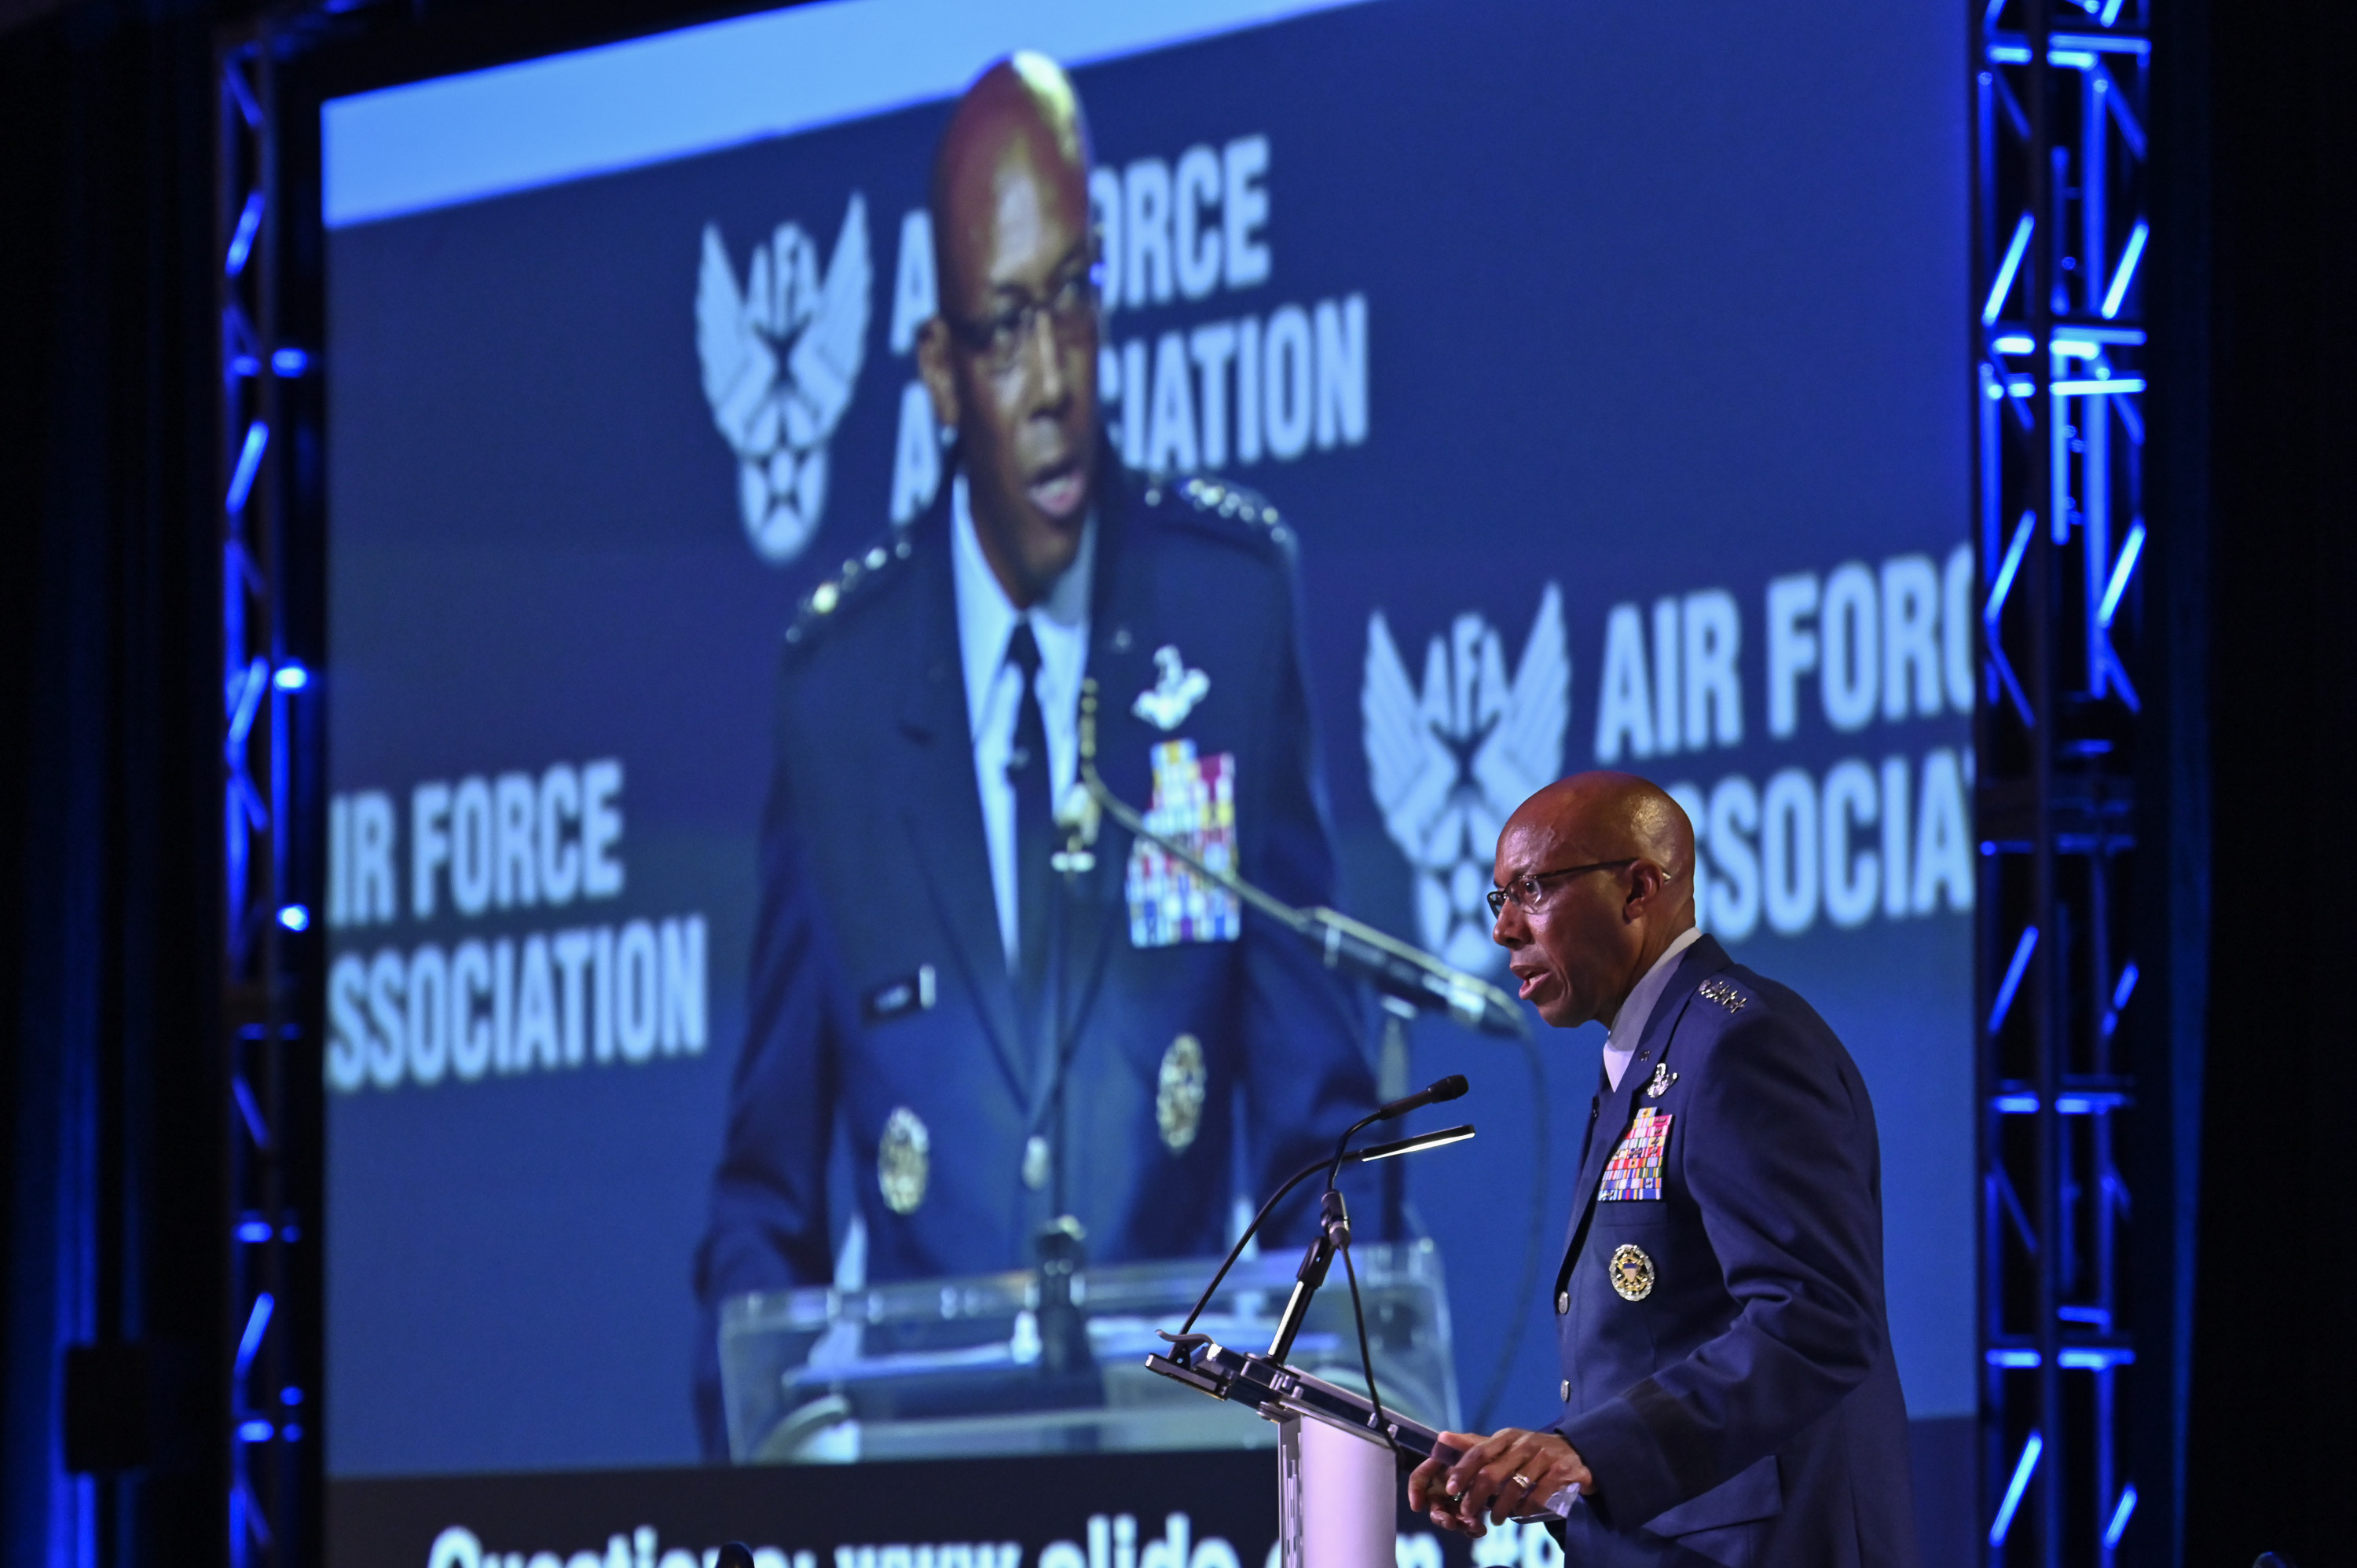 Air Force Chief of Staff Gen. CQ Brown, Jr. delivers his “Accelerate Change to Empowered Airmen” speech during the 2021 Air Force Association Air, Space and Cyber Conference in National Harbor, Md., Sept. 20, 2021.